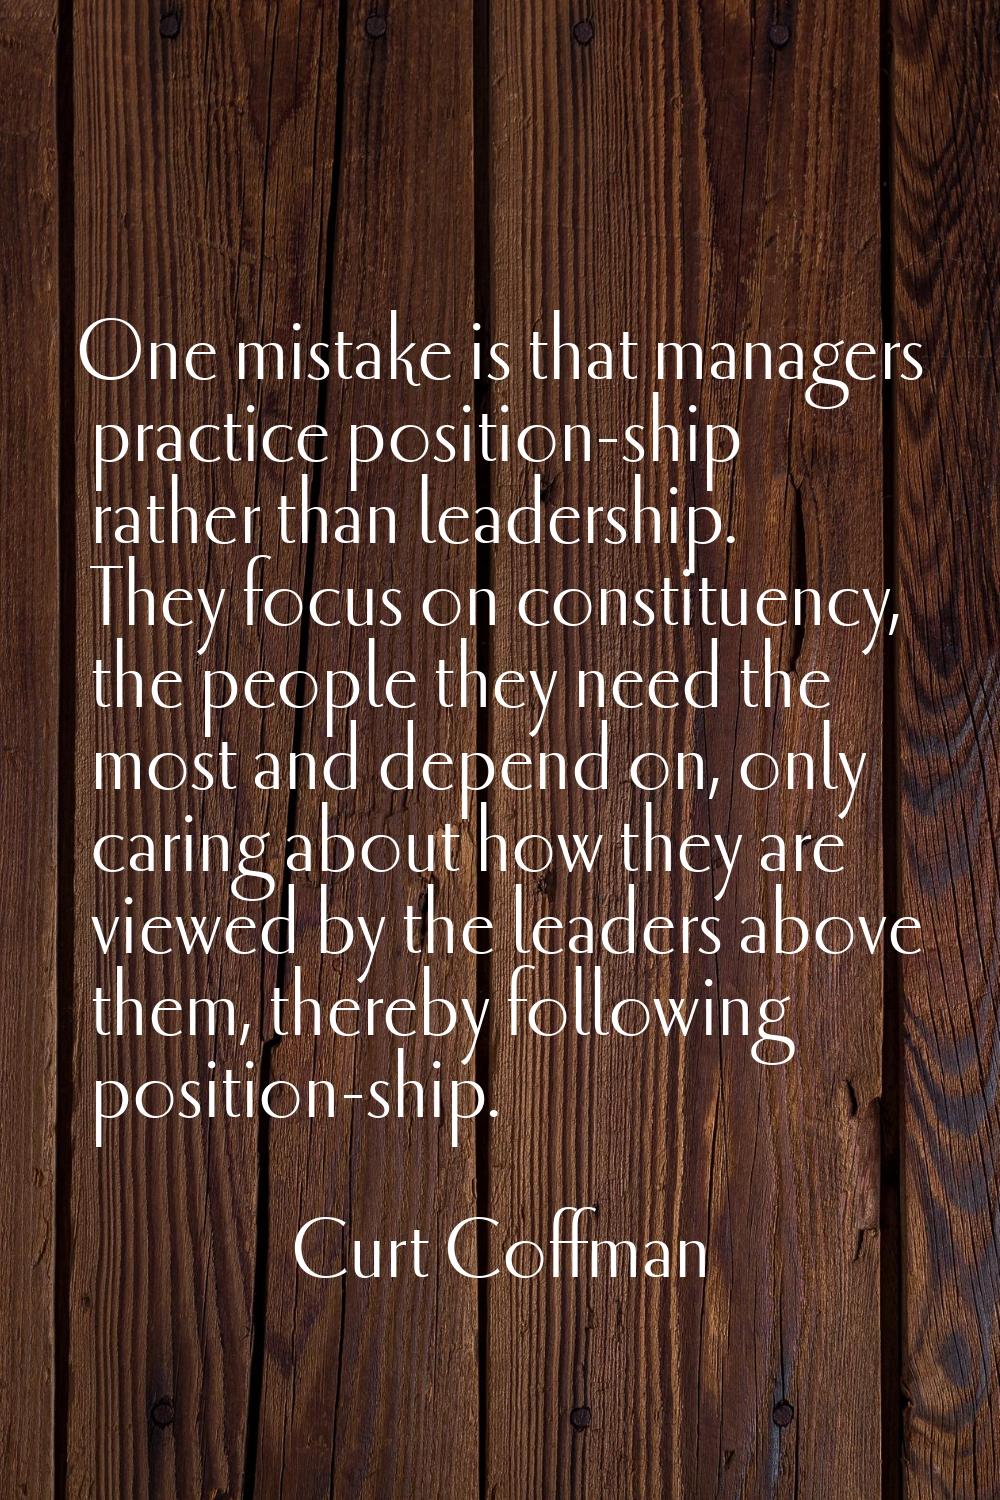 One mistake is that managers practice position-ship rather than leadership. They focus on constitue